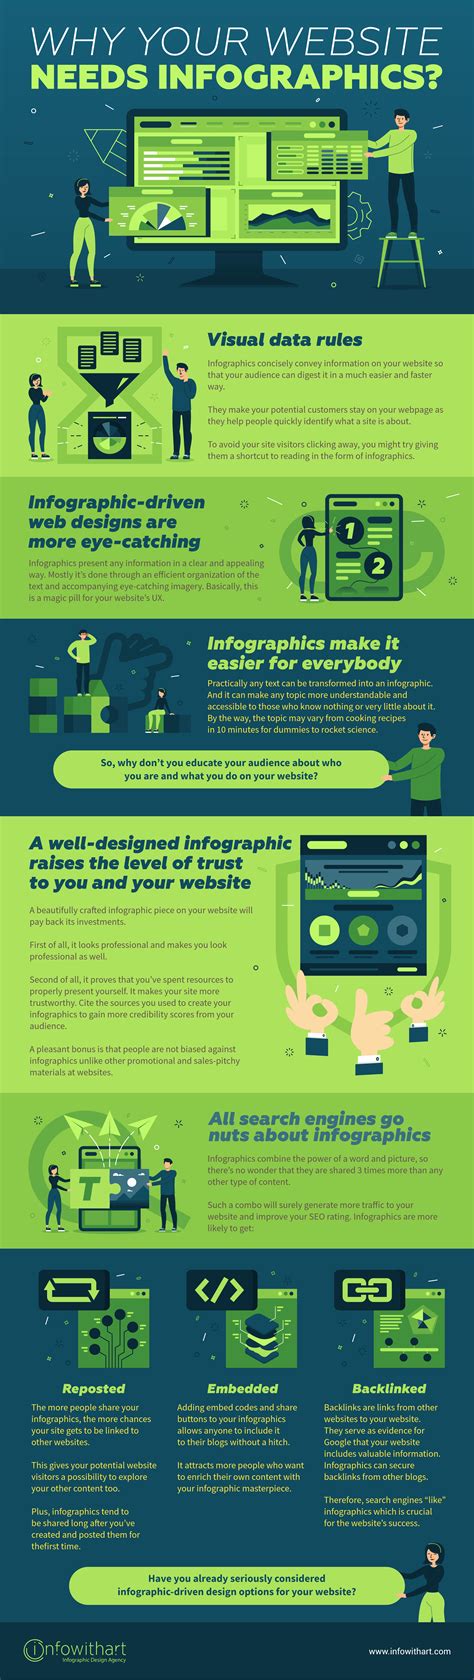 Why Your Website Needs Infographics